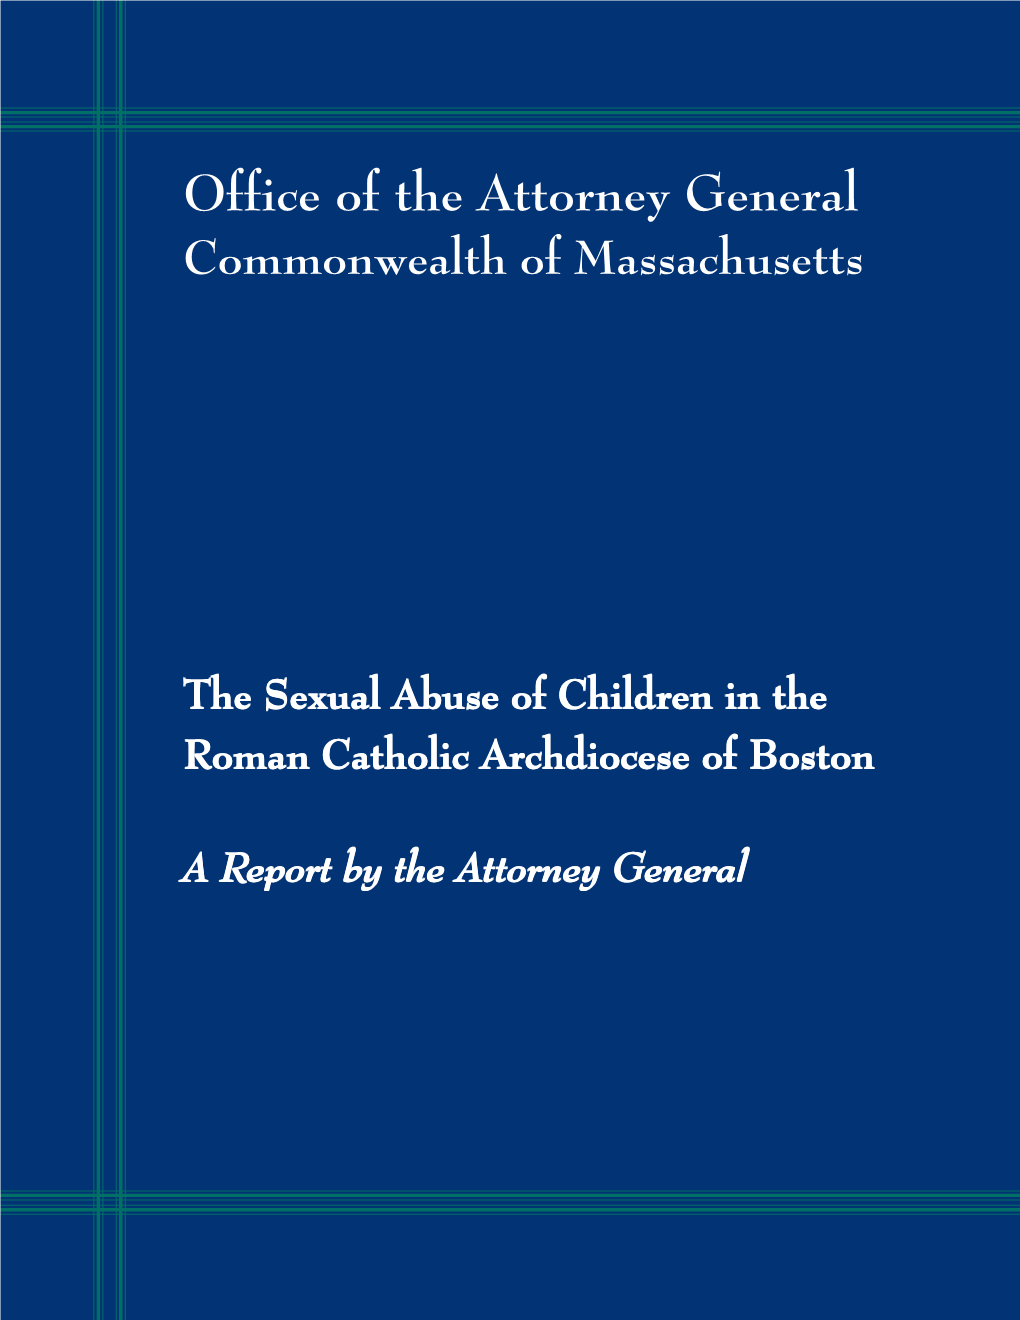 The Sexual Abuse of Children in the Roman Catholic Archdiocese of Boston